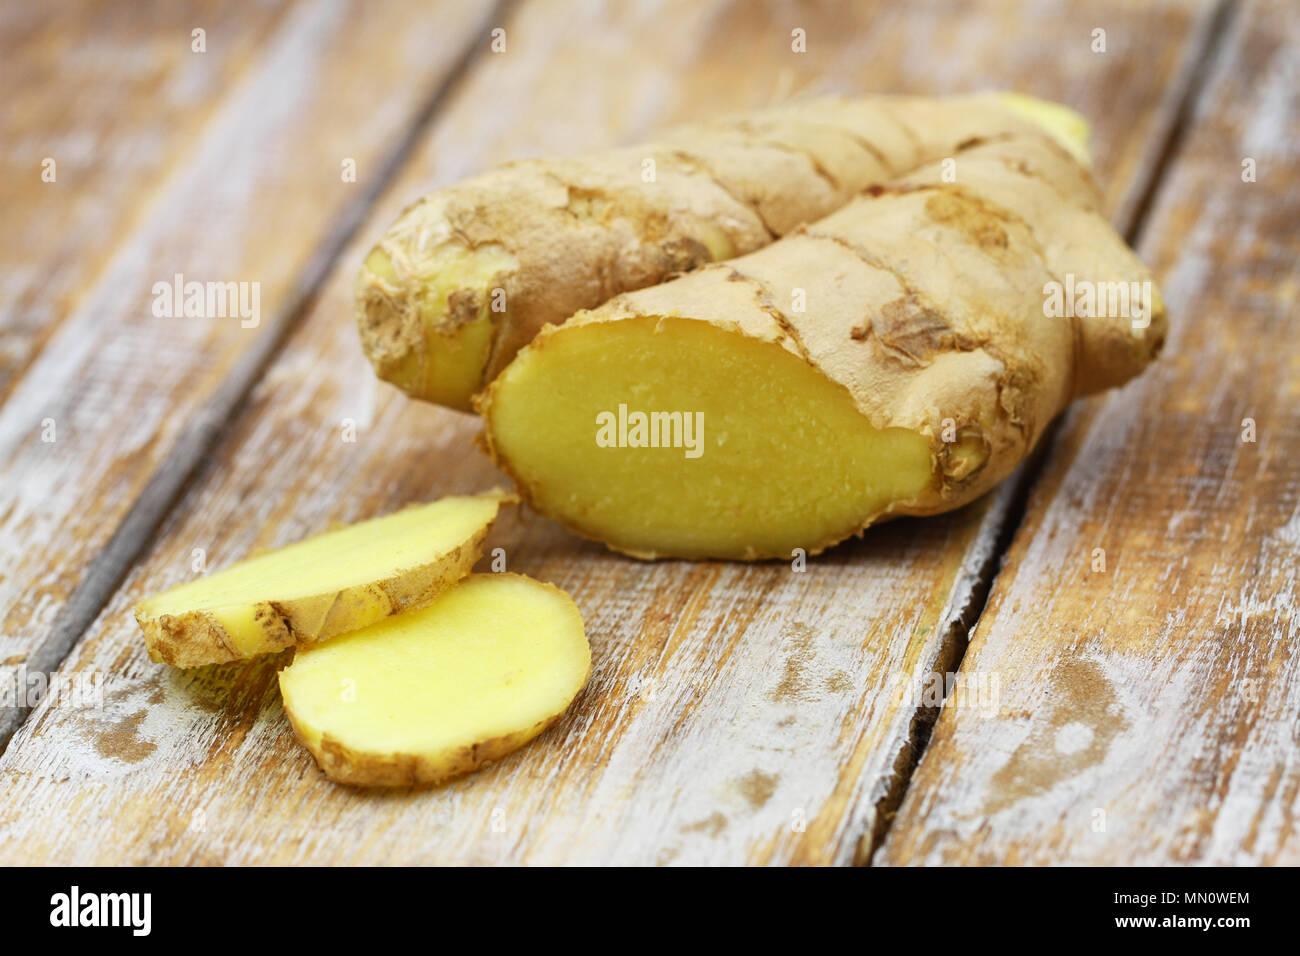 Slices of fresh ginger on rustic wooden surface Stock Photo